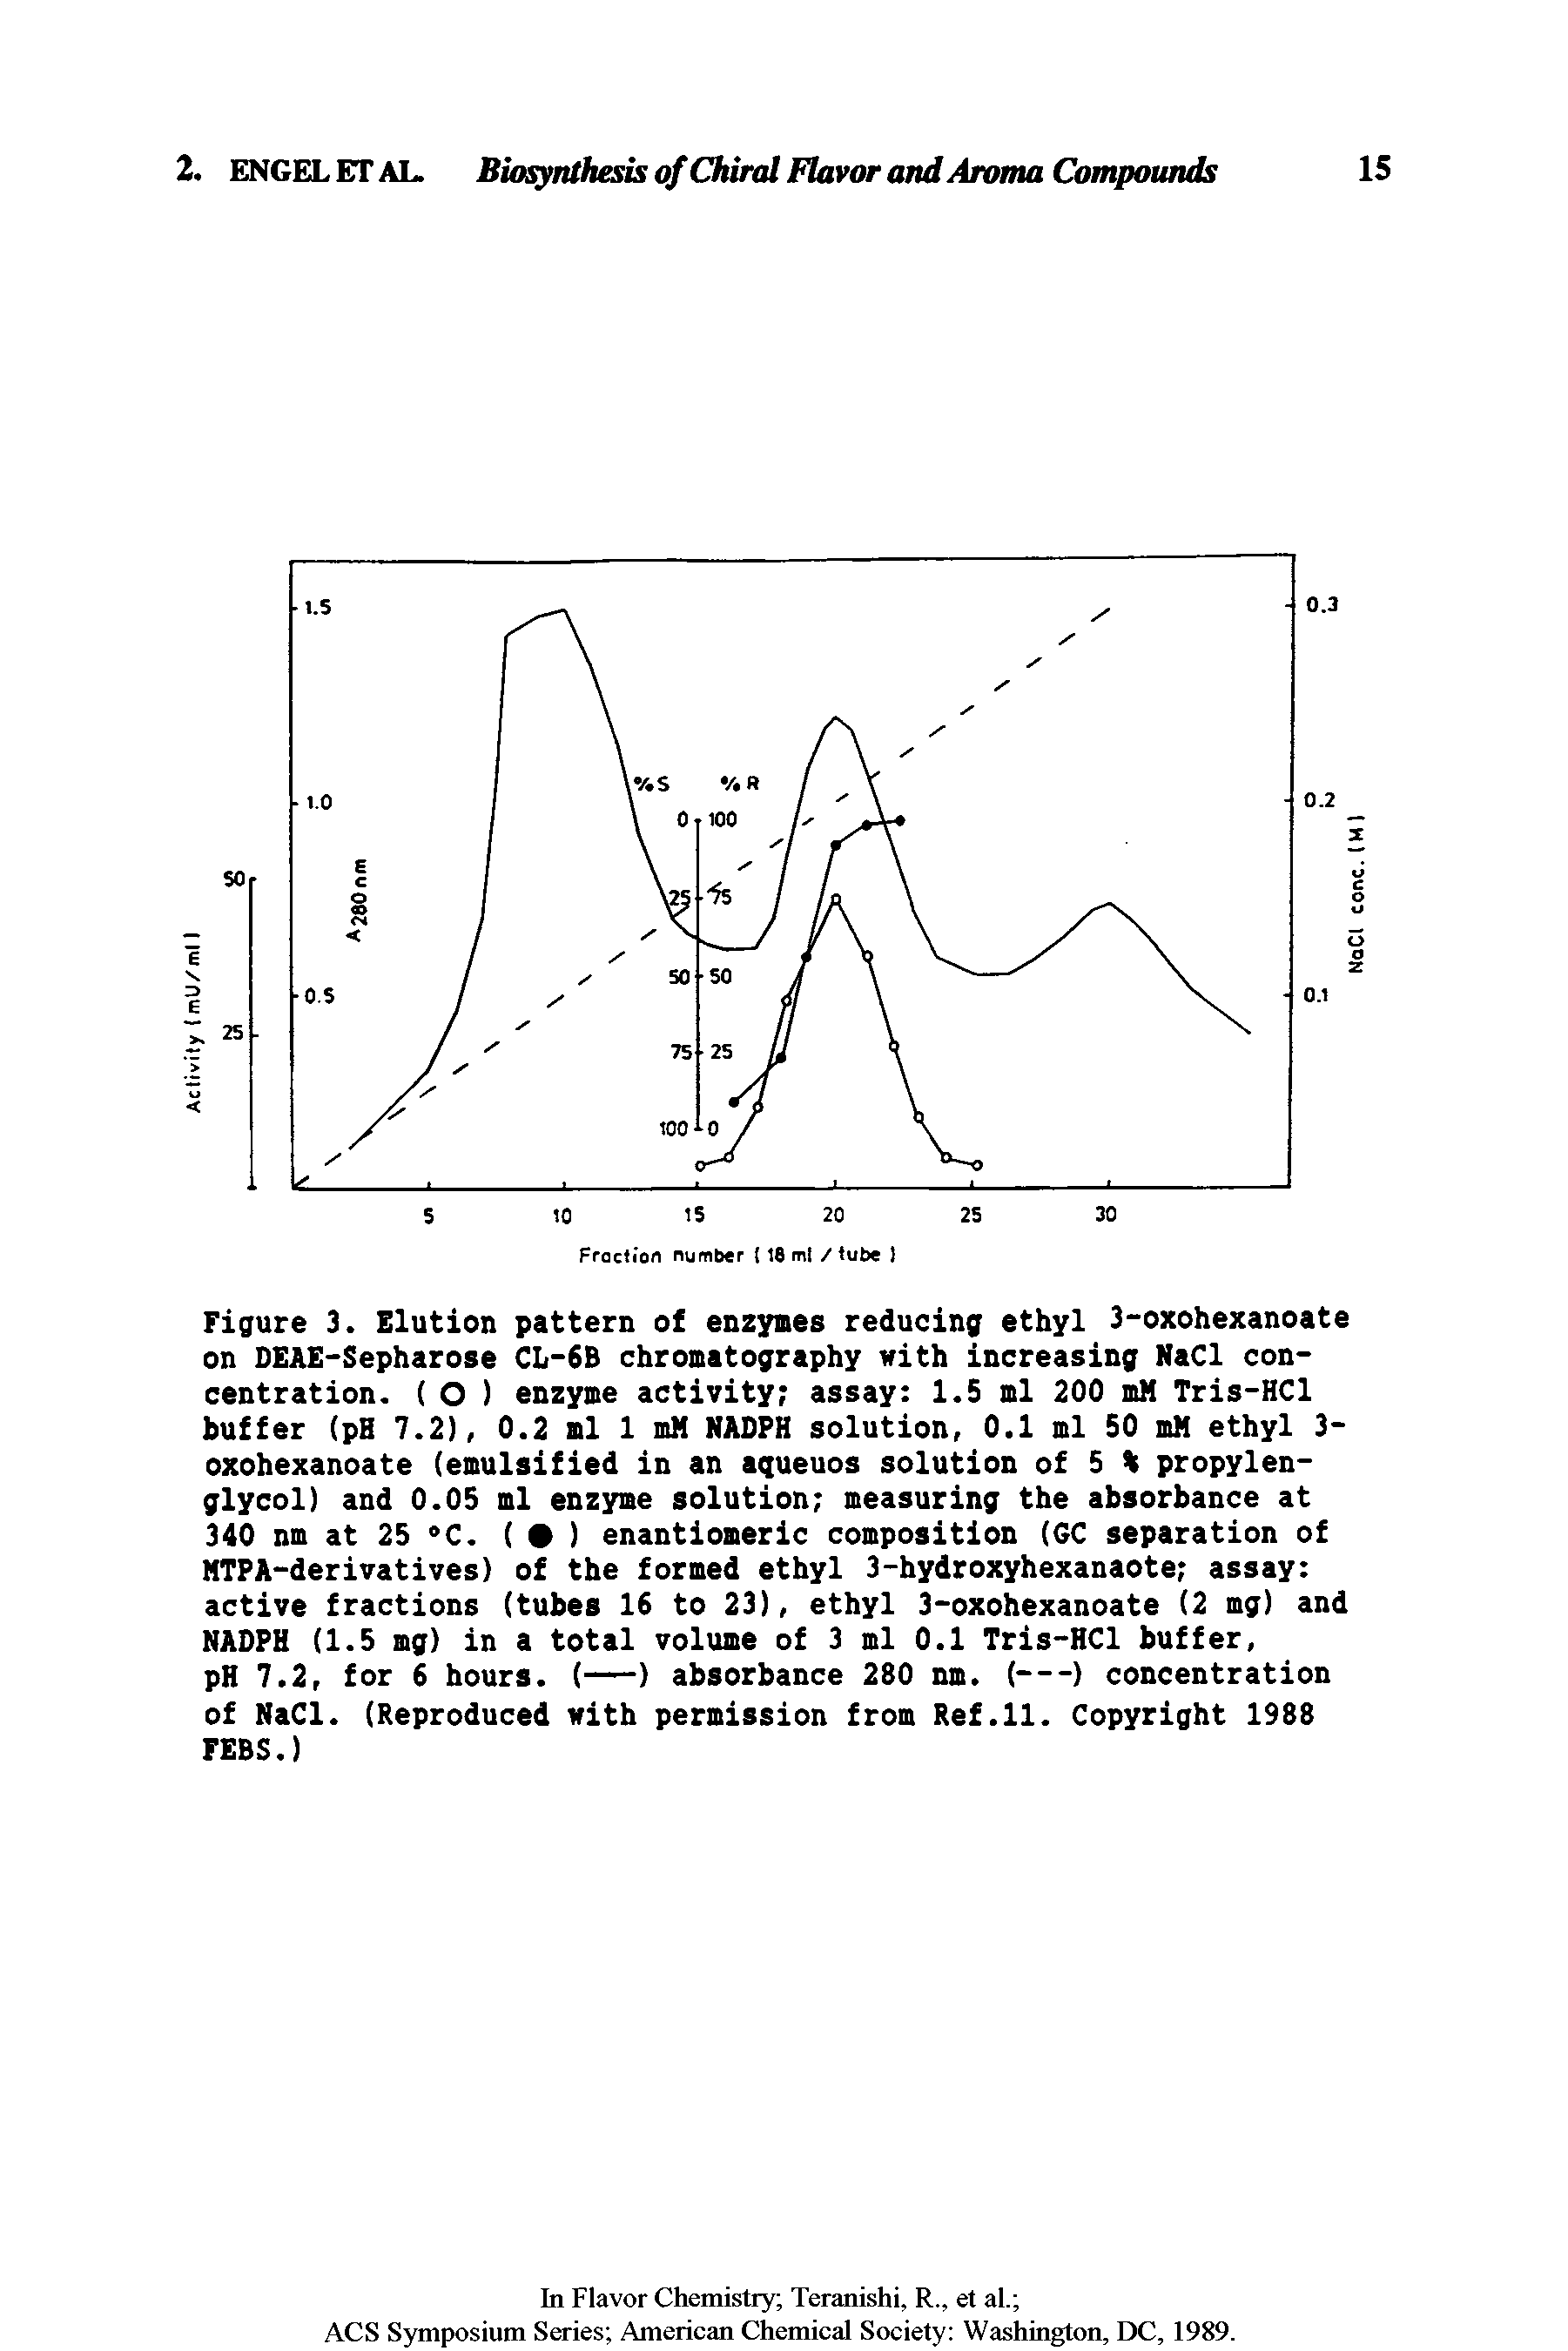 Figure 3. Elution pattern of enzymes reducing ethyl 3-oxohexanoate on DEAE-Sepharose CL-6B chromatography with increasing NaCl concentration. ( O ) enzyme activity assay 1.5 ml 200 mM Tris-HCl buffer (pH 7.2), 0.2 ml 1 mM NADPH solution, 0.1 ml 50 mM ethyl 3-oxohexanoate (emulsified in an aqueuos solution of 5 % propylen-glycol) and 0.05 ml enzyme solution measuring the absorbance at 340 nm at 25 °C. ( ) enantiomeric composition (GC separation of MTPA-derivatives) of the formed ethyl 3-hydroxyhexanaote assay active fractions (tubes 16 to 23), ethyl 3-oxohexanoate (2 mg) and NADPH (1.5 mg) in a total volume of 3 ml 0.1 Tris-HCl buffer,...